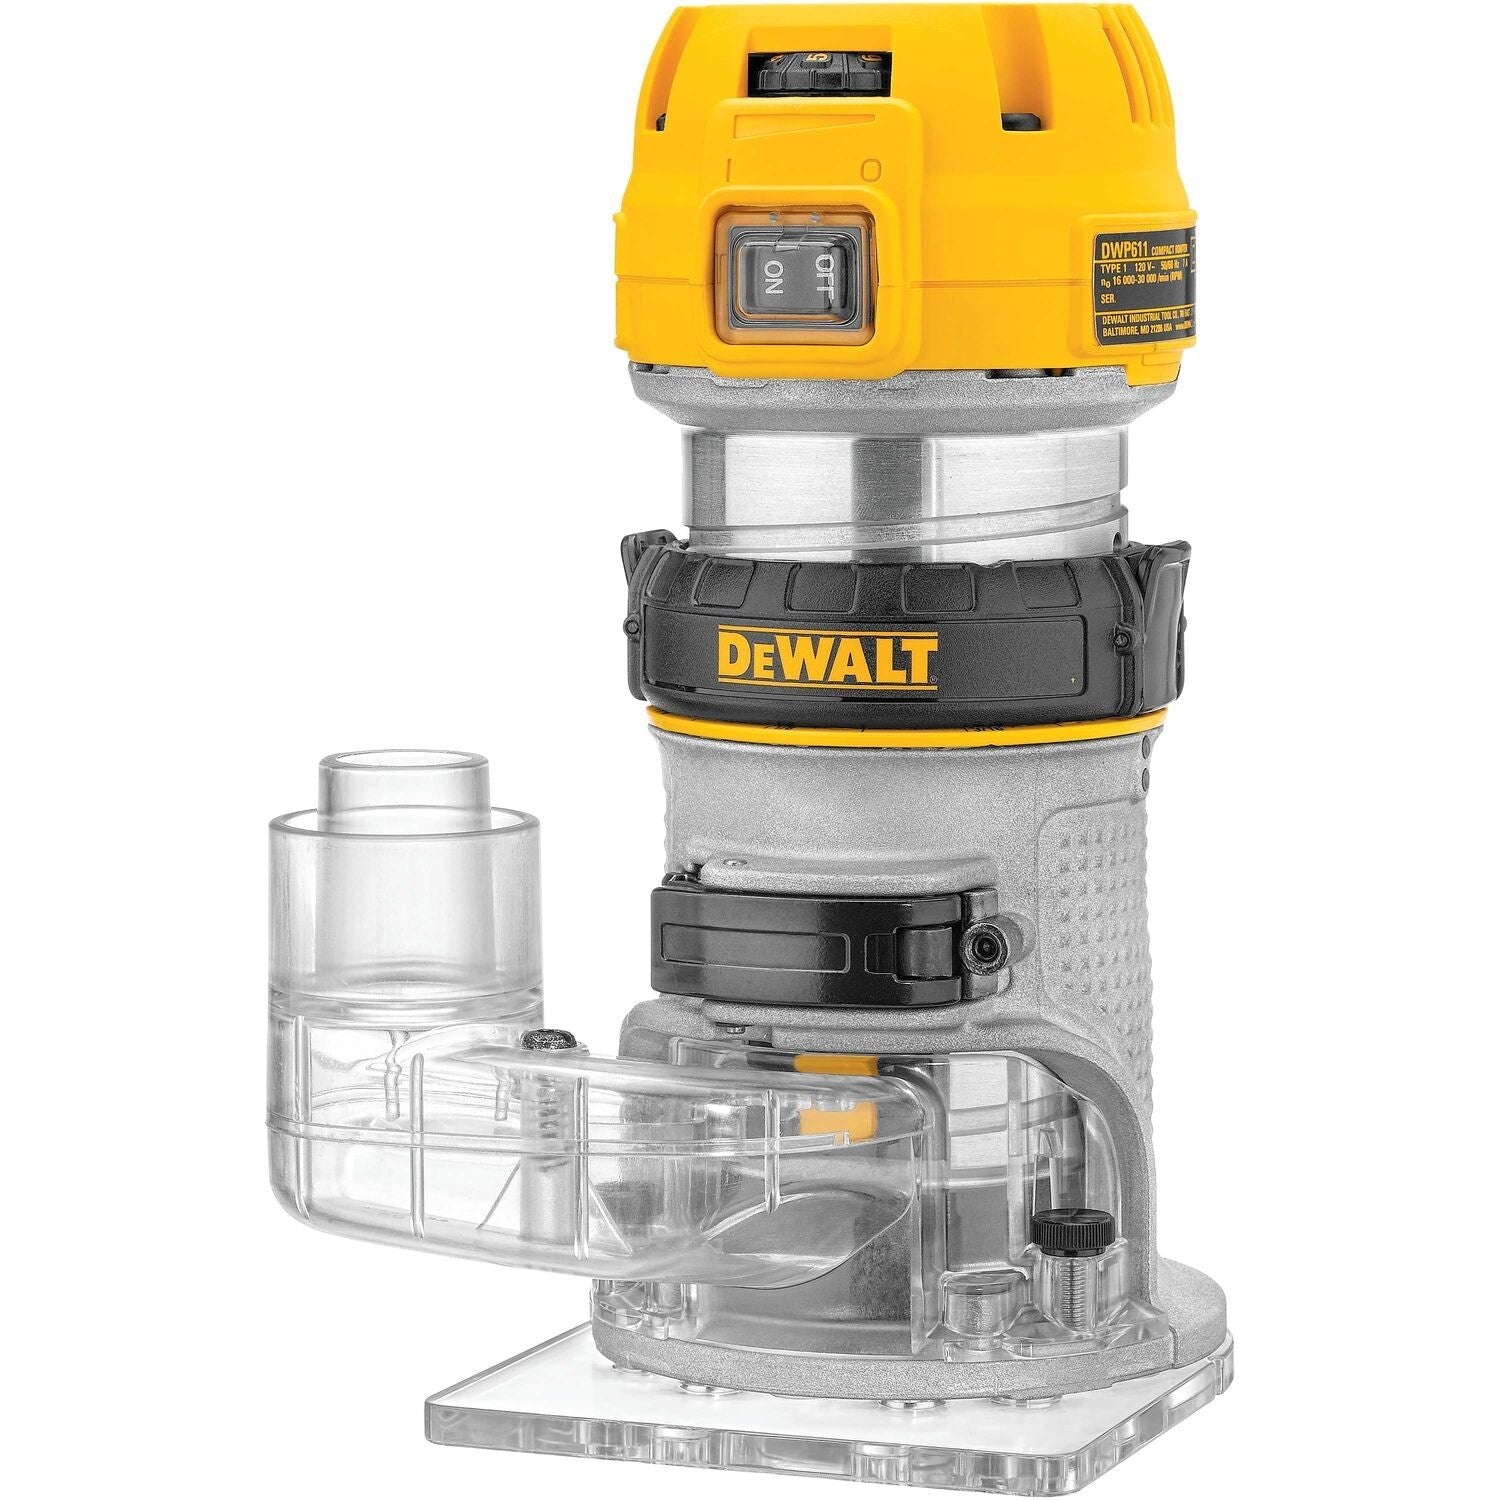 Dewalt DNP615 Compact Router Dust Collection Adapter for Fixed Base